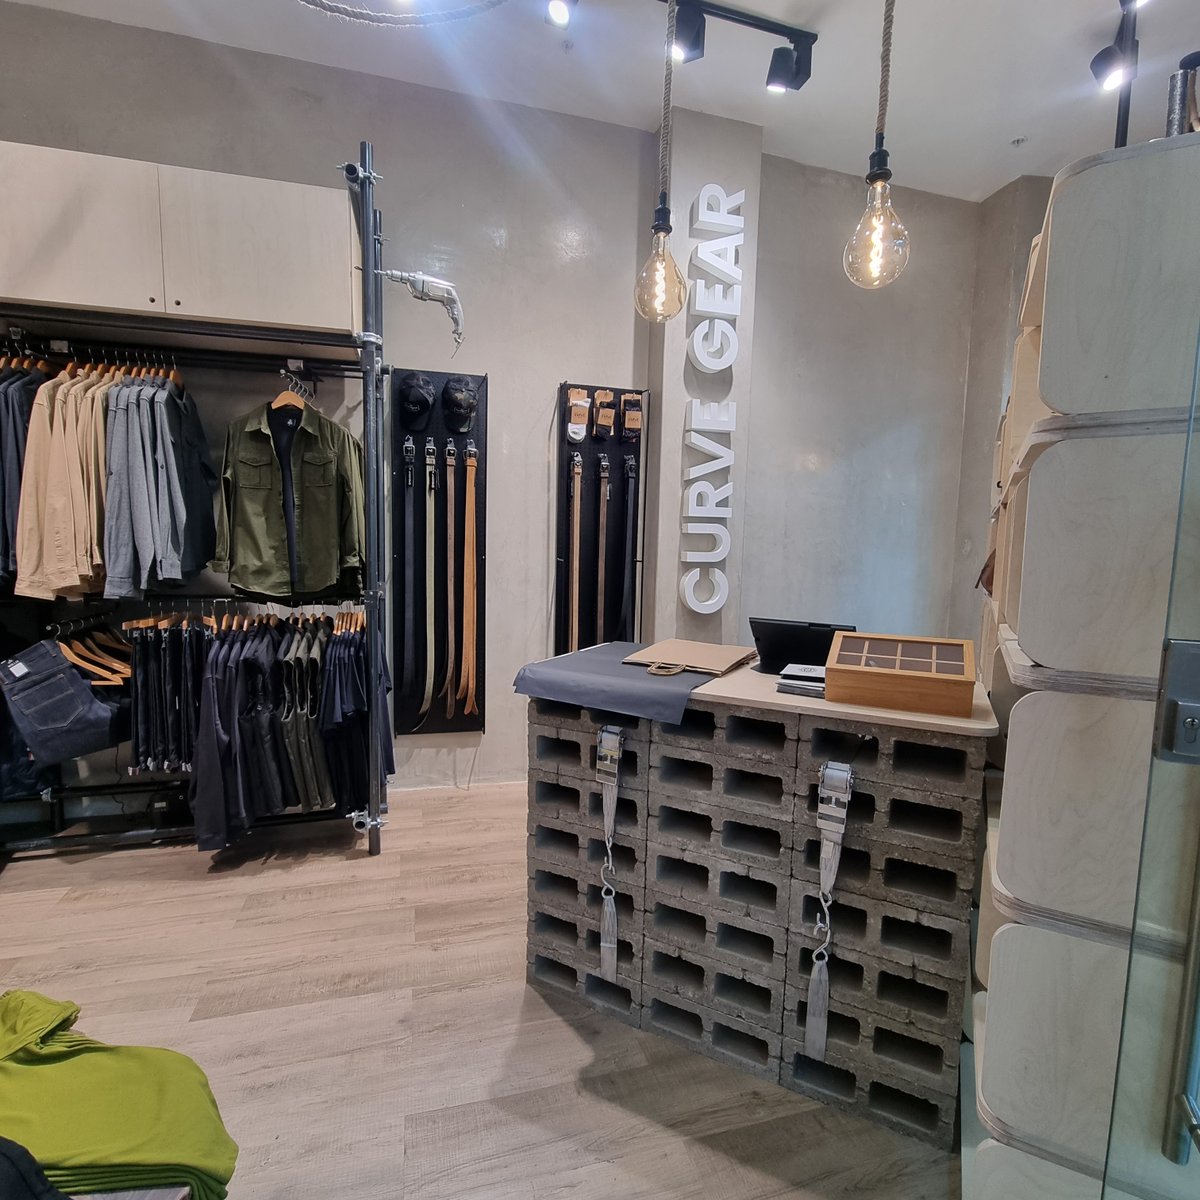 NEW STORE | Welcome to Canal Walk, Curve Gear. 😍🔥✈️

Curve Gear is an urban workwear & apparel brand, providing high-quality clothing items & footwear. Find the new store on the Upper Level, next to Crocs.

#CanalWalk #HaveItAll